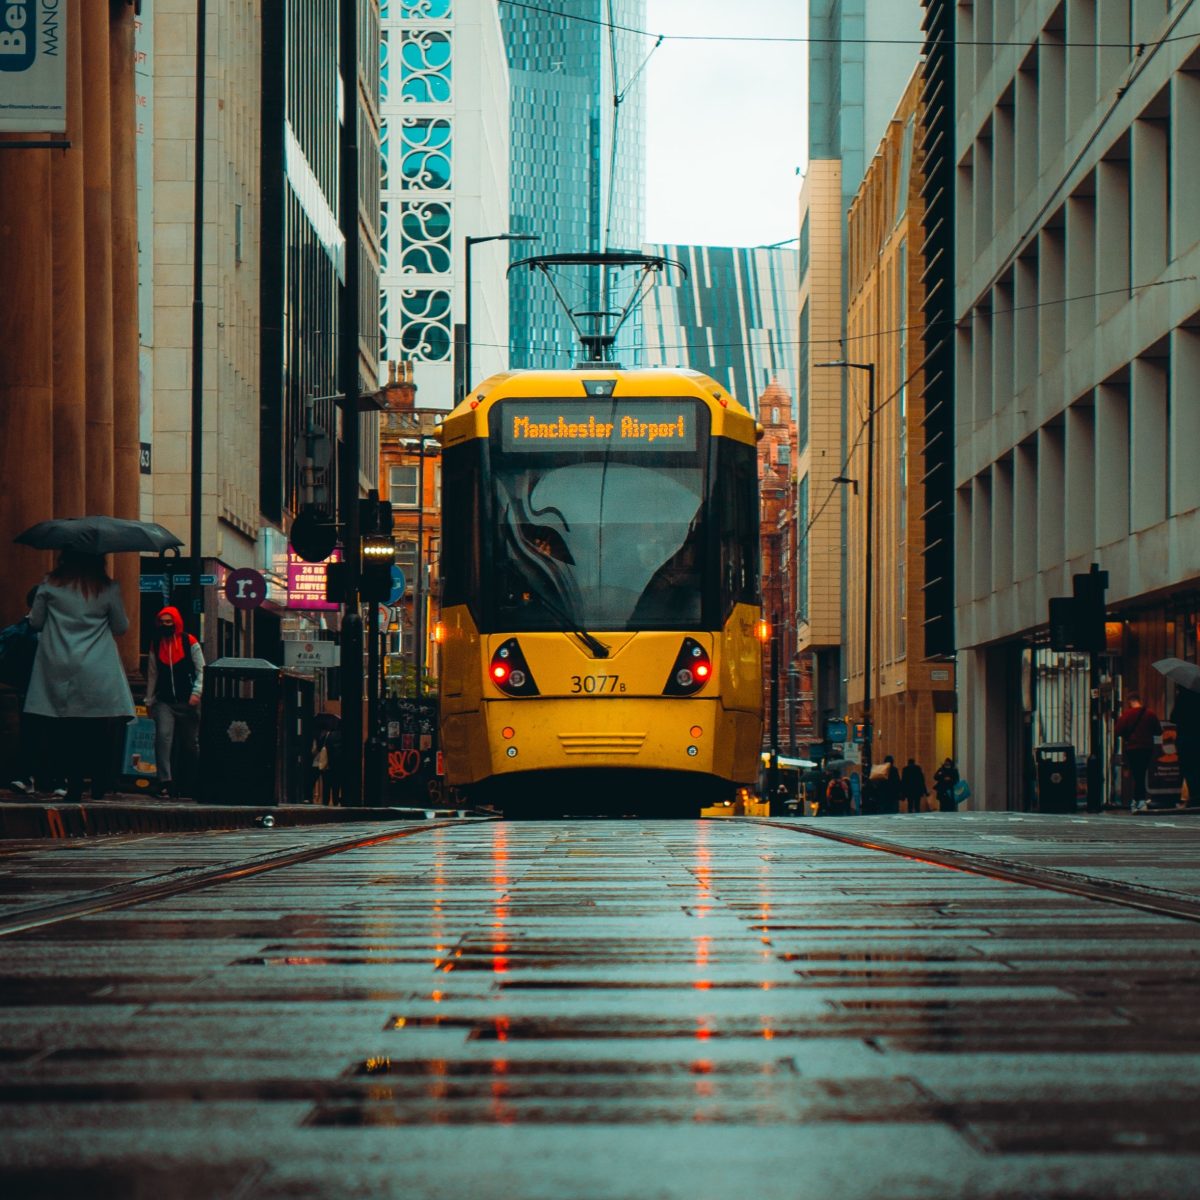 Tram in Manchester city centre. Photo credit Zohaib Alam on Unsplash.